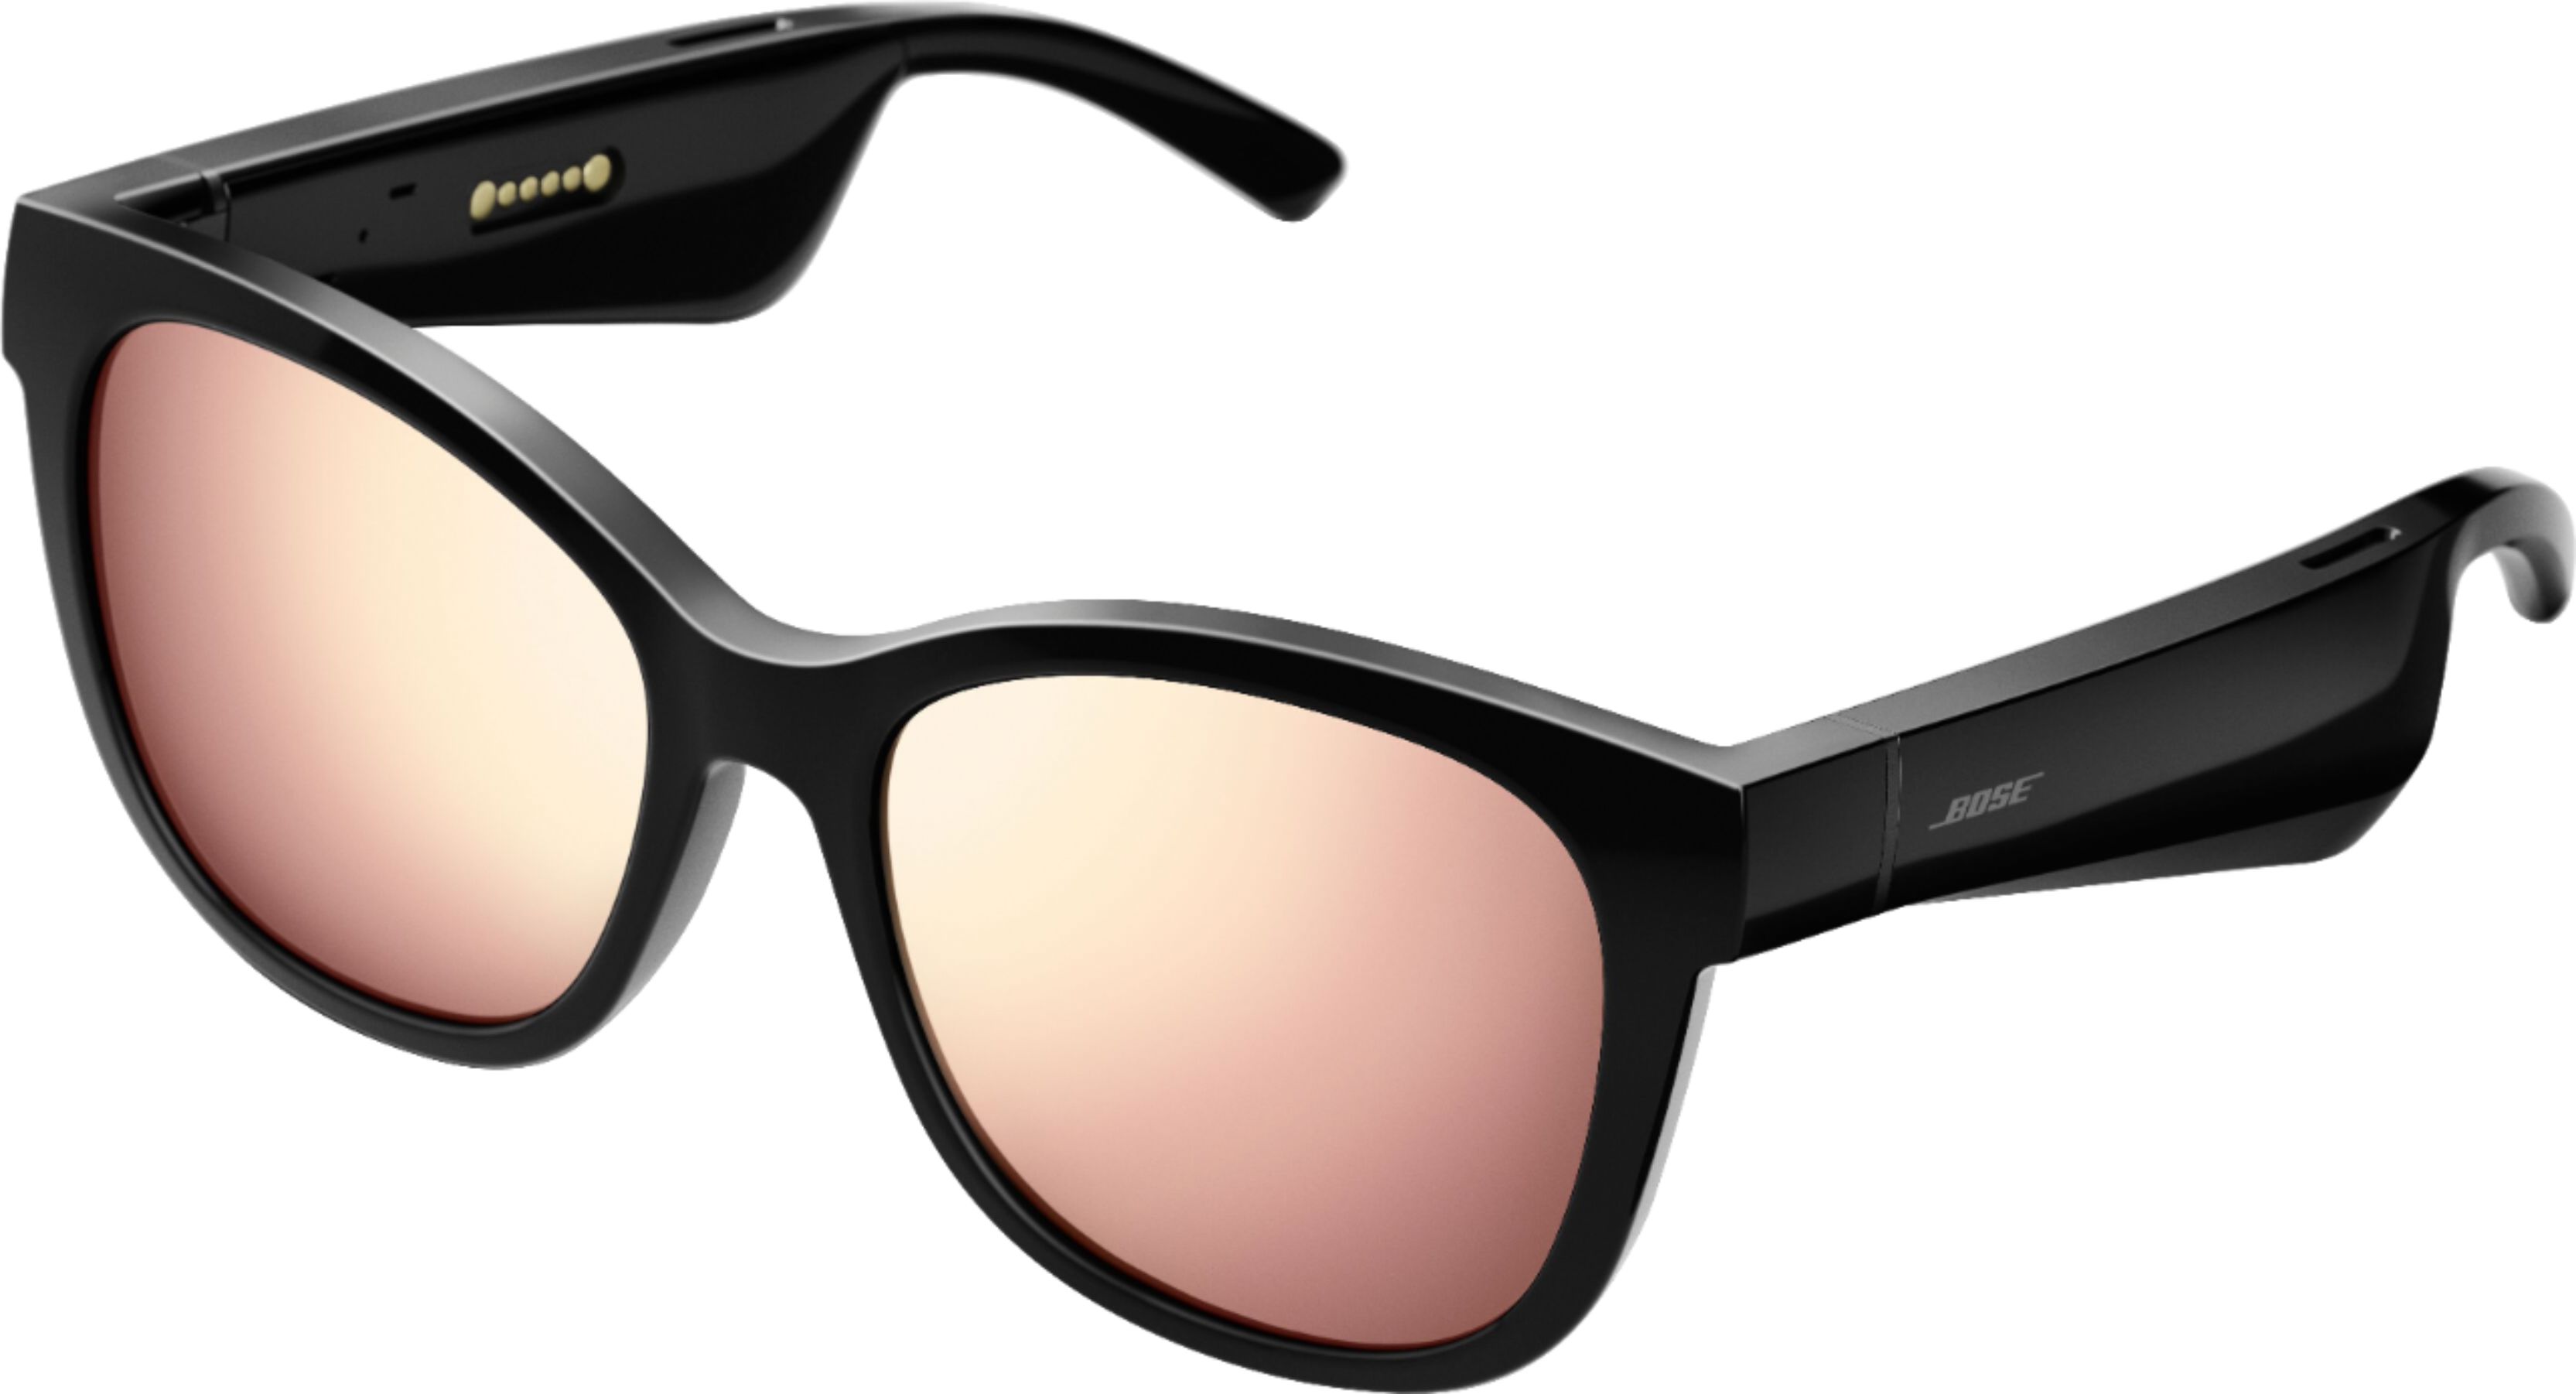 Angle View: Bose - Soprano Style Lenses - Polarized Mirrored Rose Gold